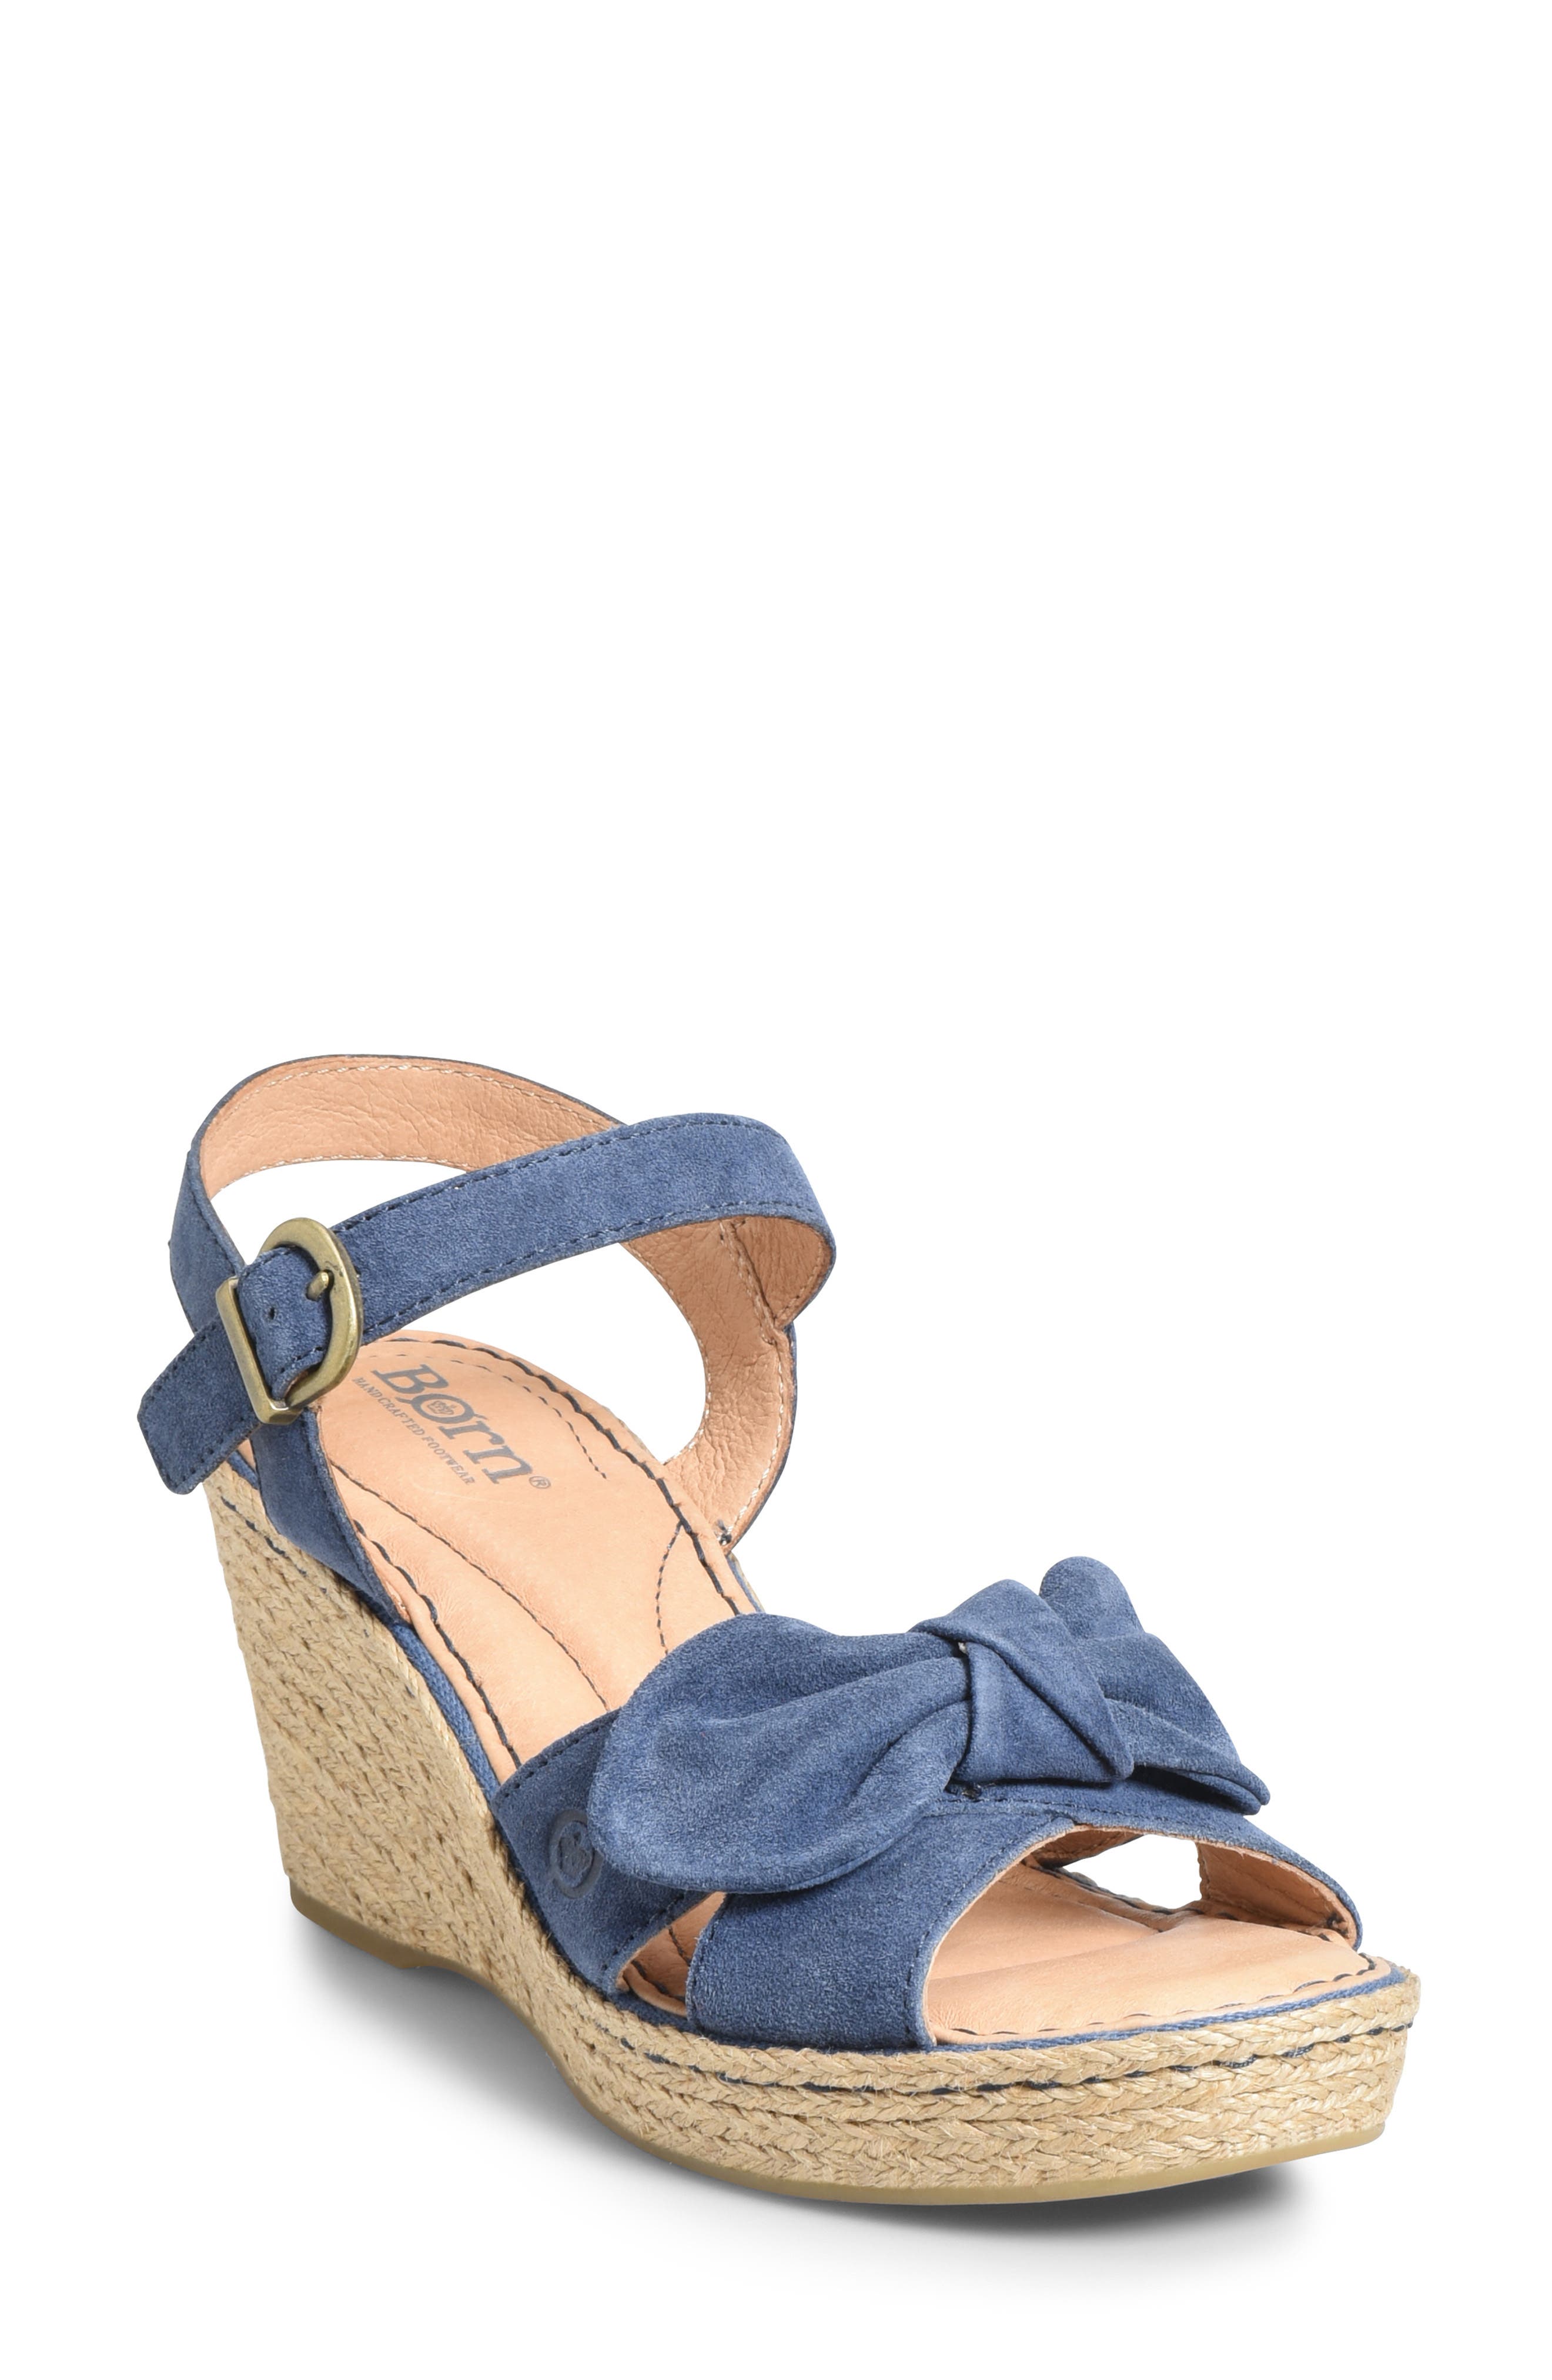 Born | Monticello Knotted Wedge Sandal 